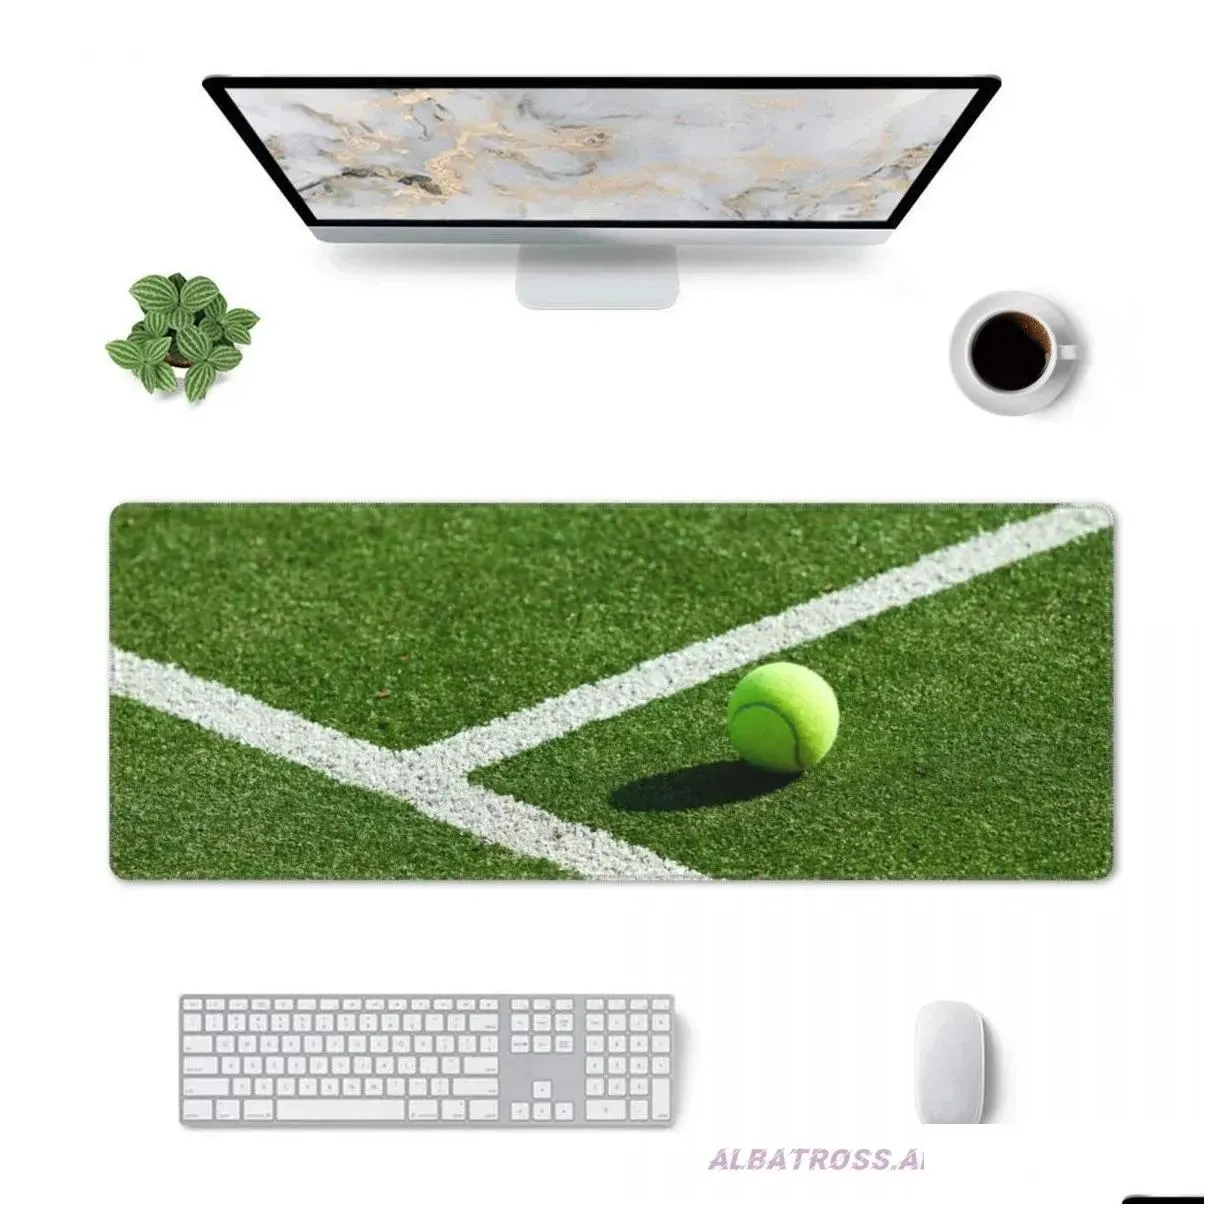 Pads Tennis Ball Gaming Mouse Pad Rubber Stitched Edges Mousepad 31.5`` X 11.8``